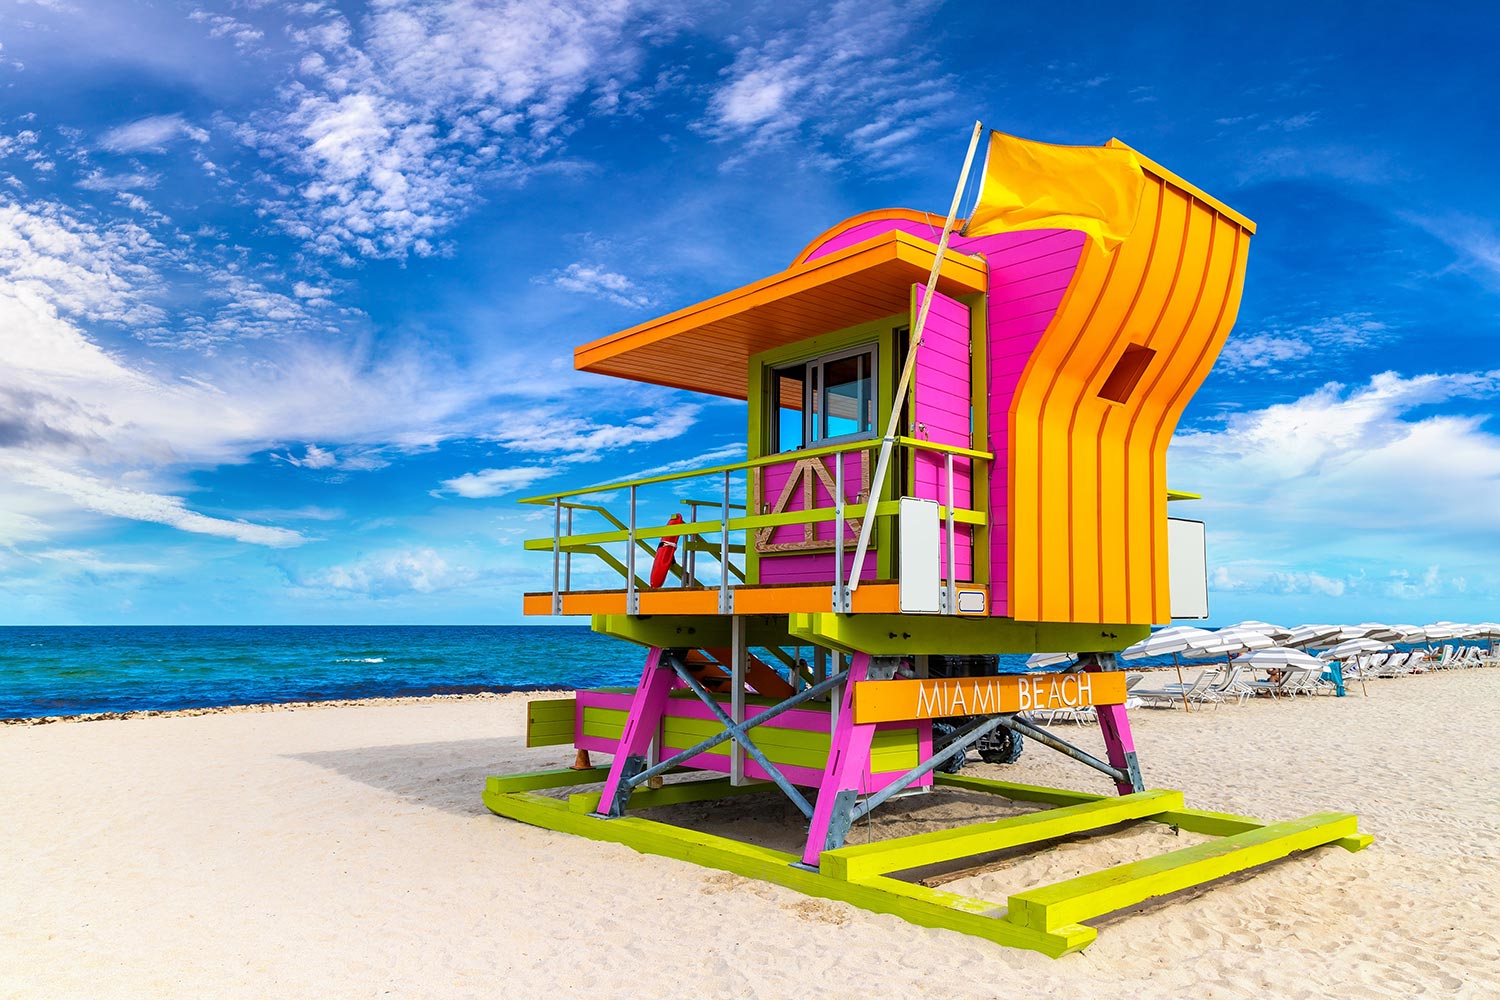 Miami getaway with 9 essential trip planning tips